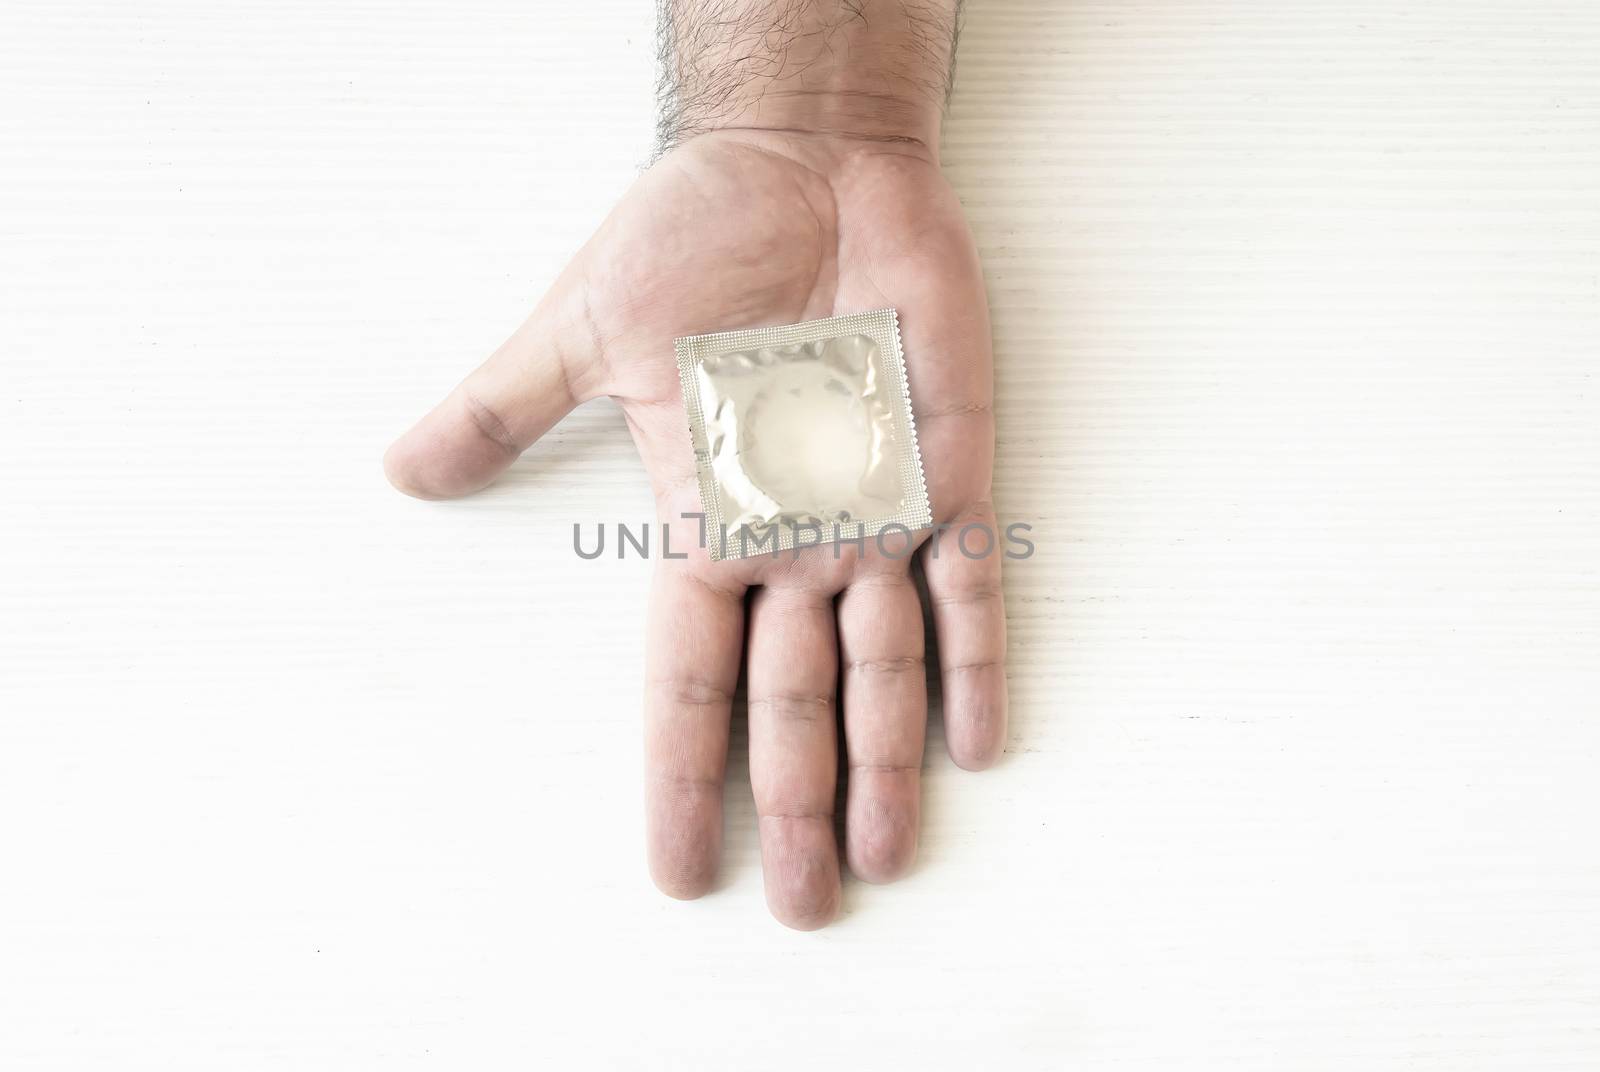 a condom packed on the palm of a male hand by rarrarorro